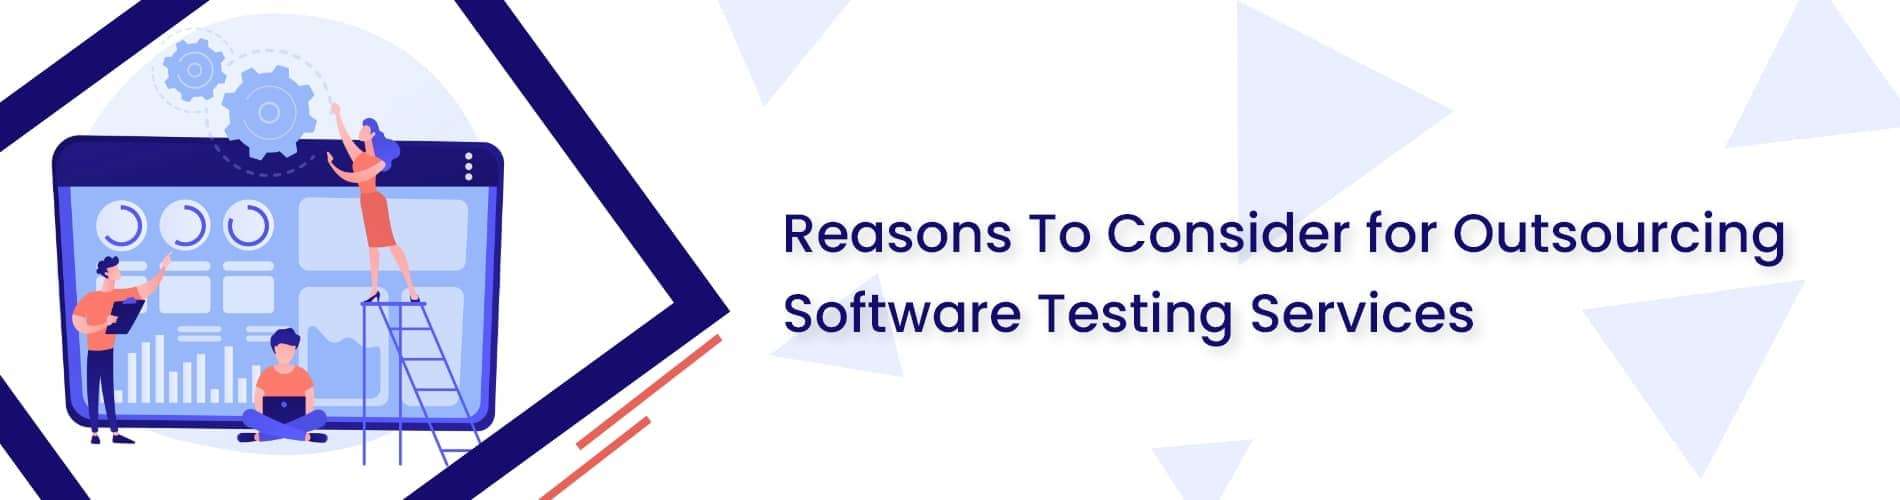 Reasons to cosider outsourcing Software Testing Services